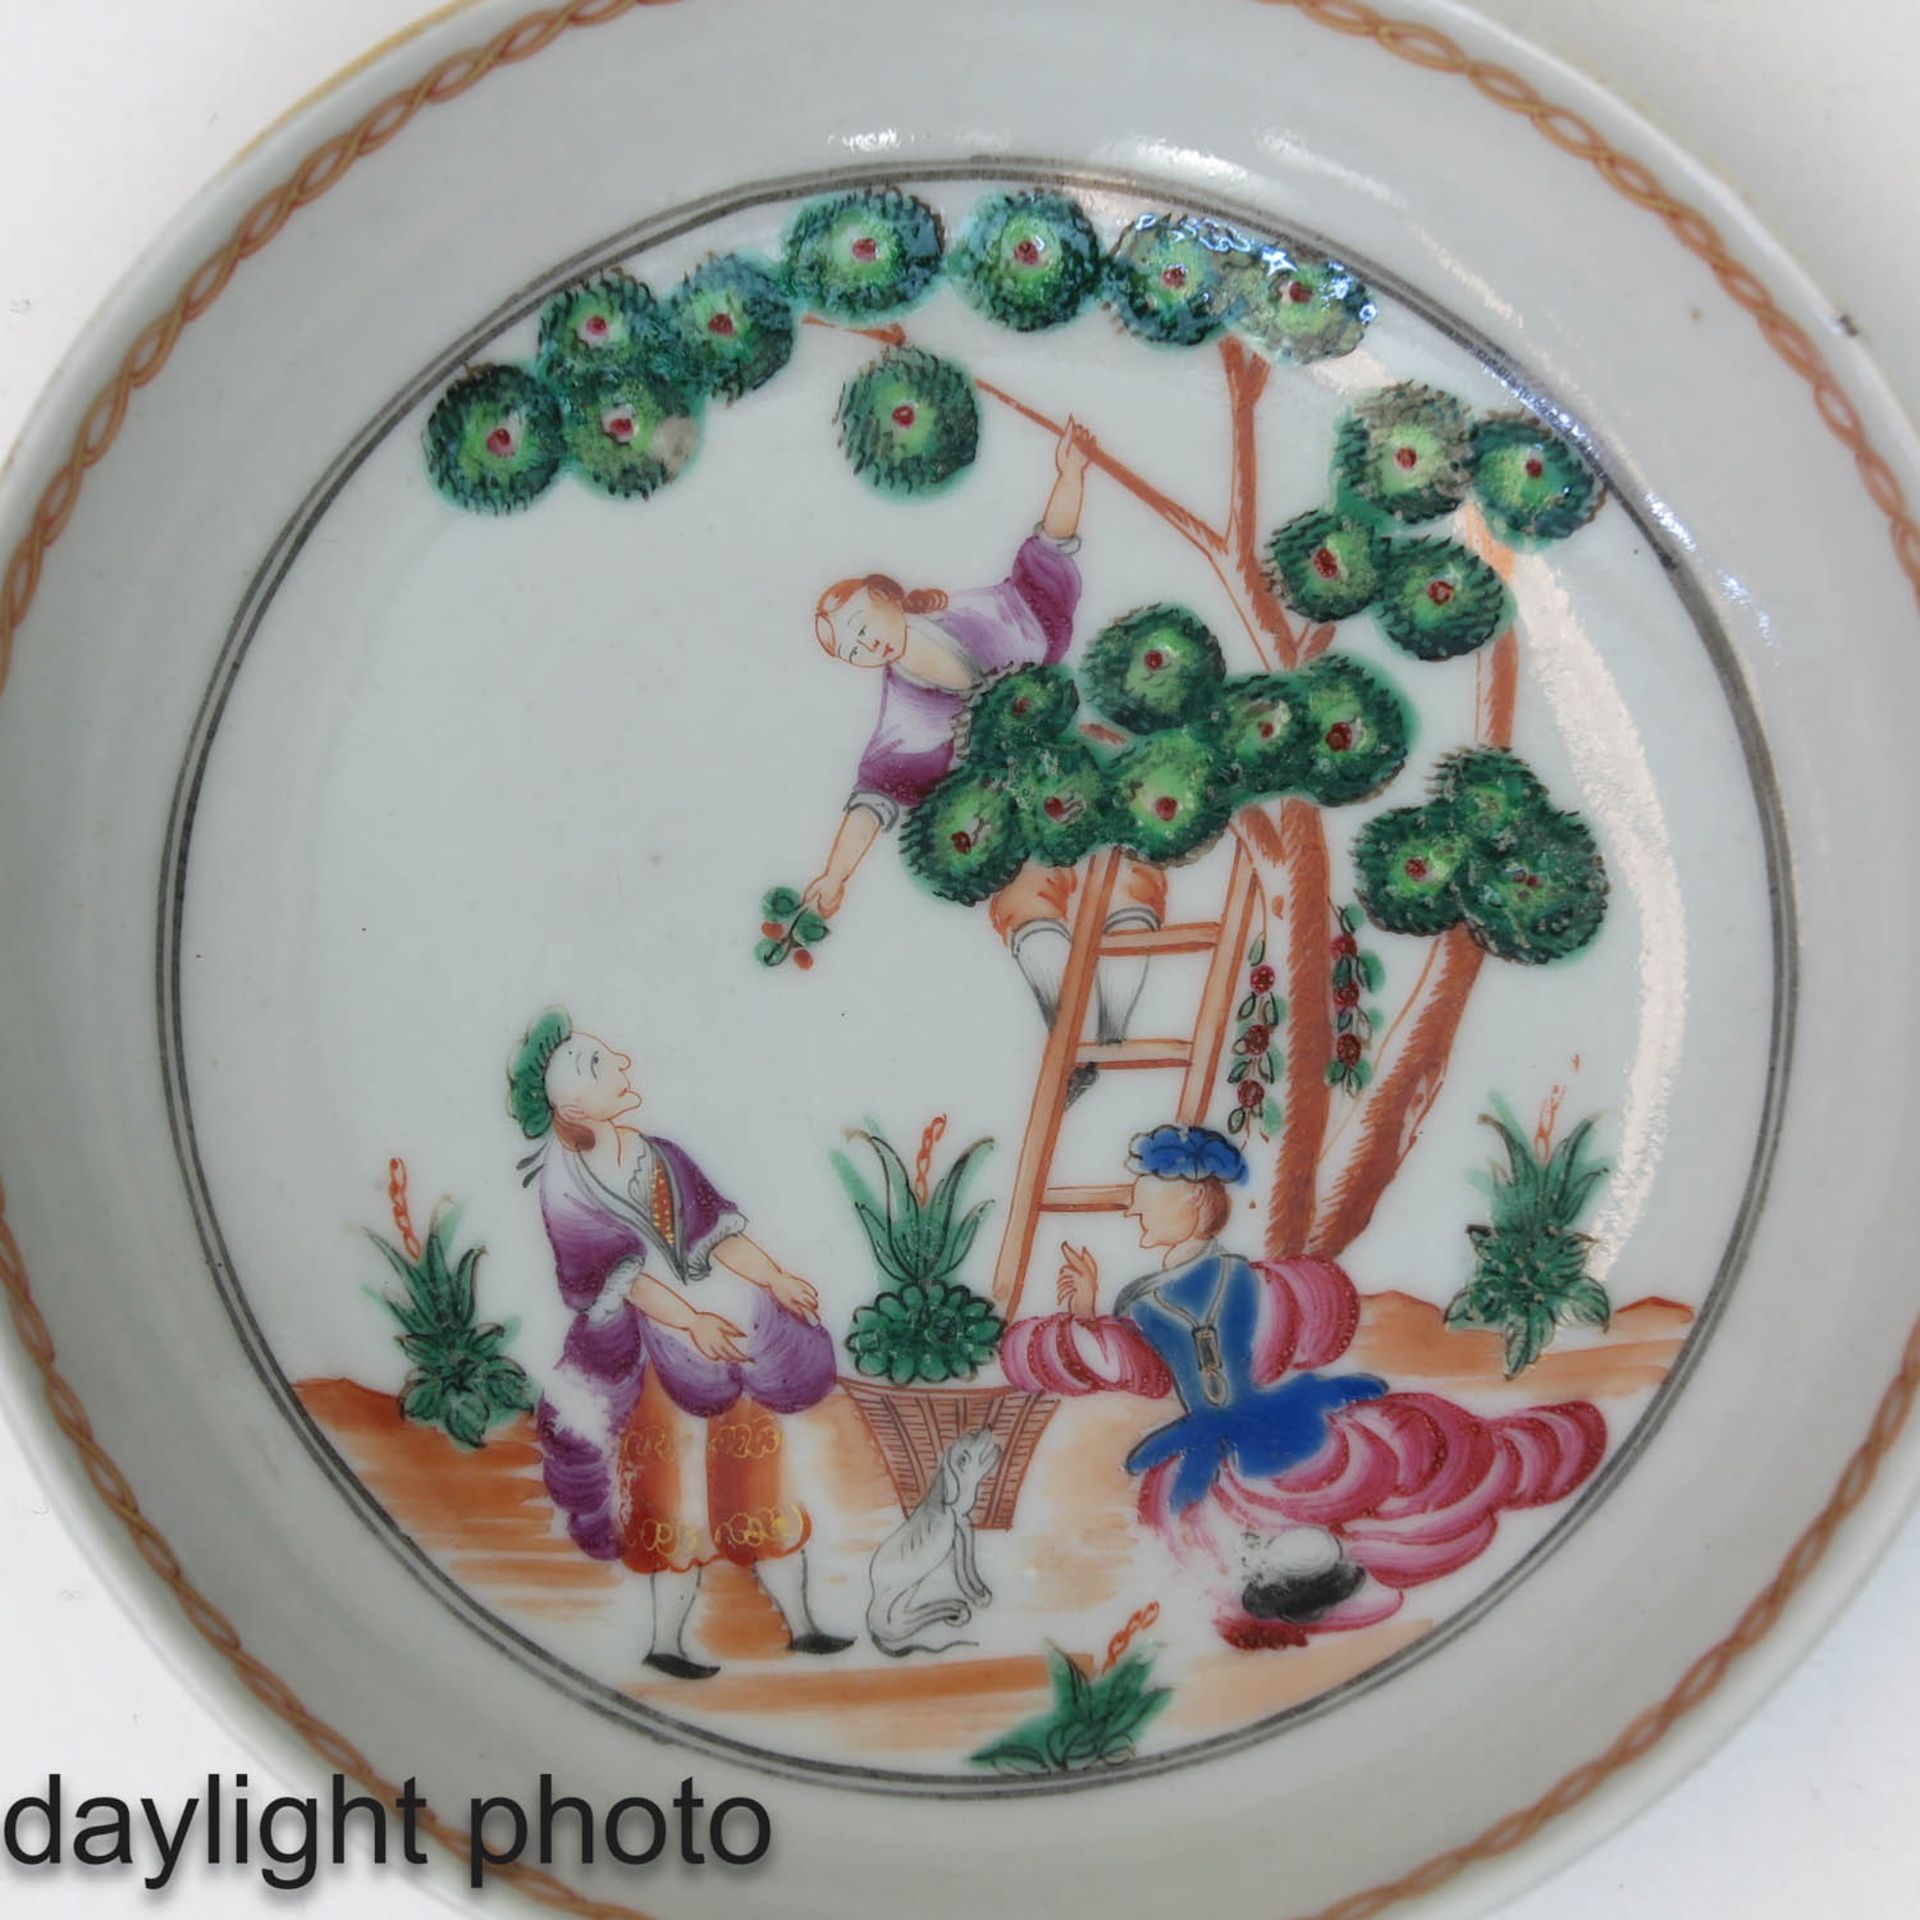 A Cherry Pickers Decor Cup and Saucer - Bild 9 aus 9